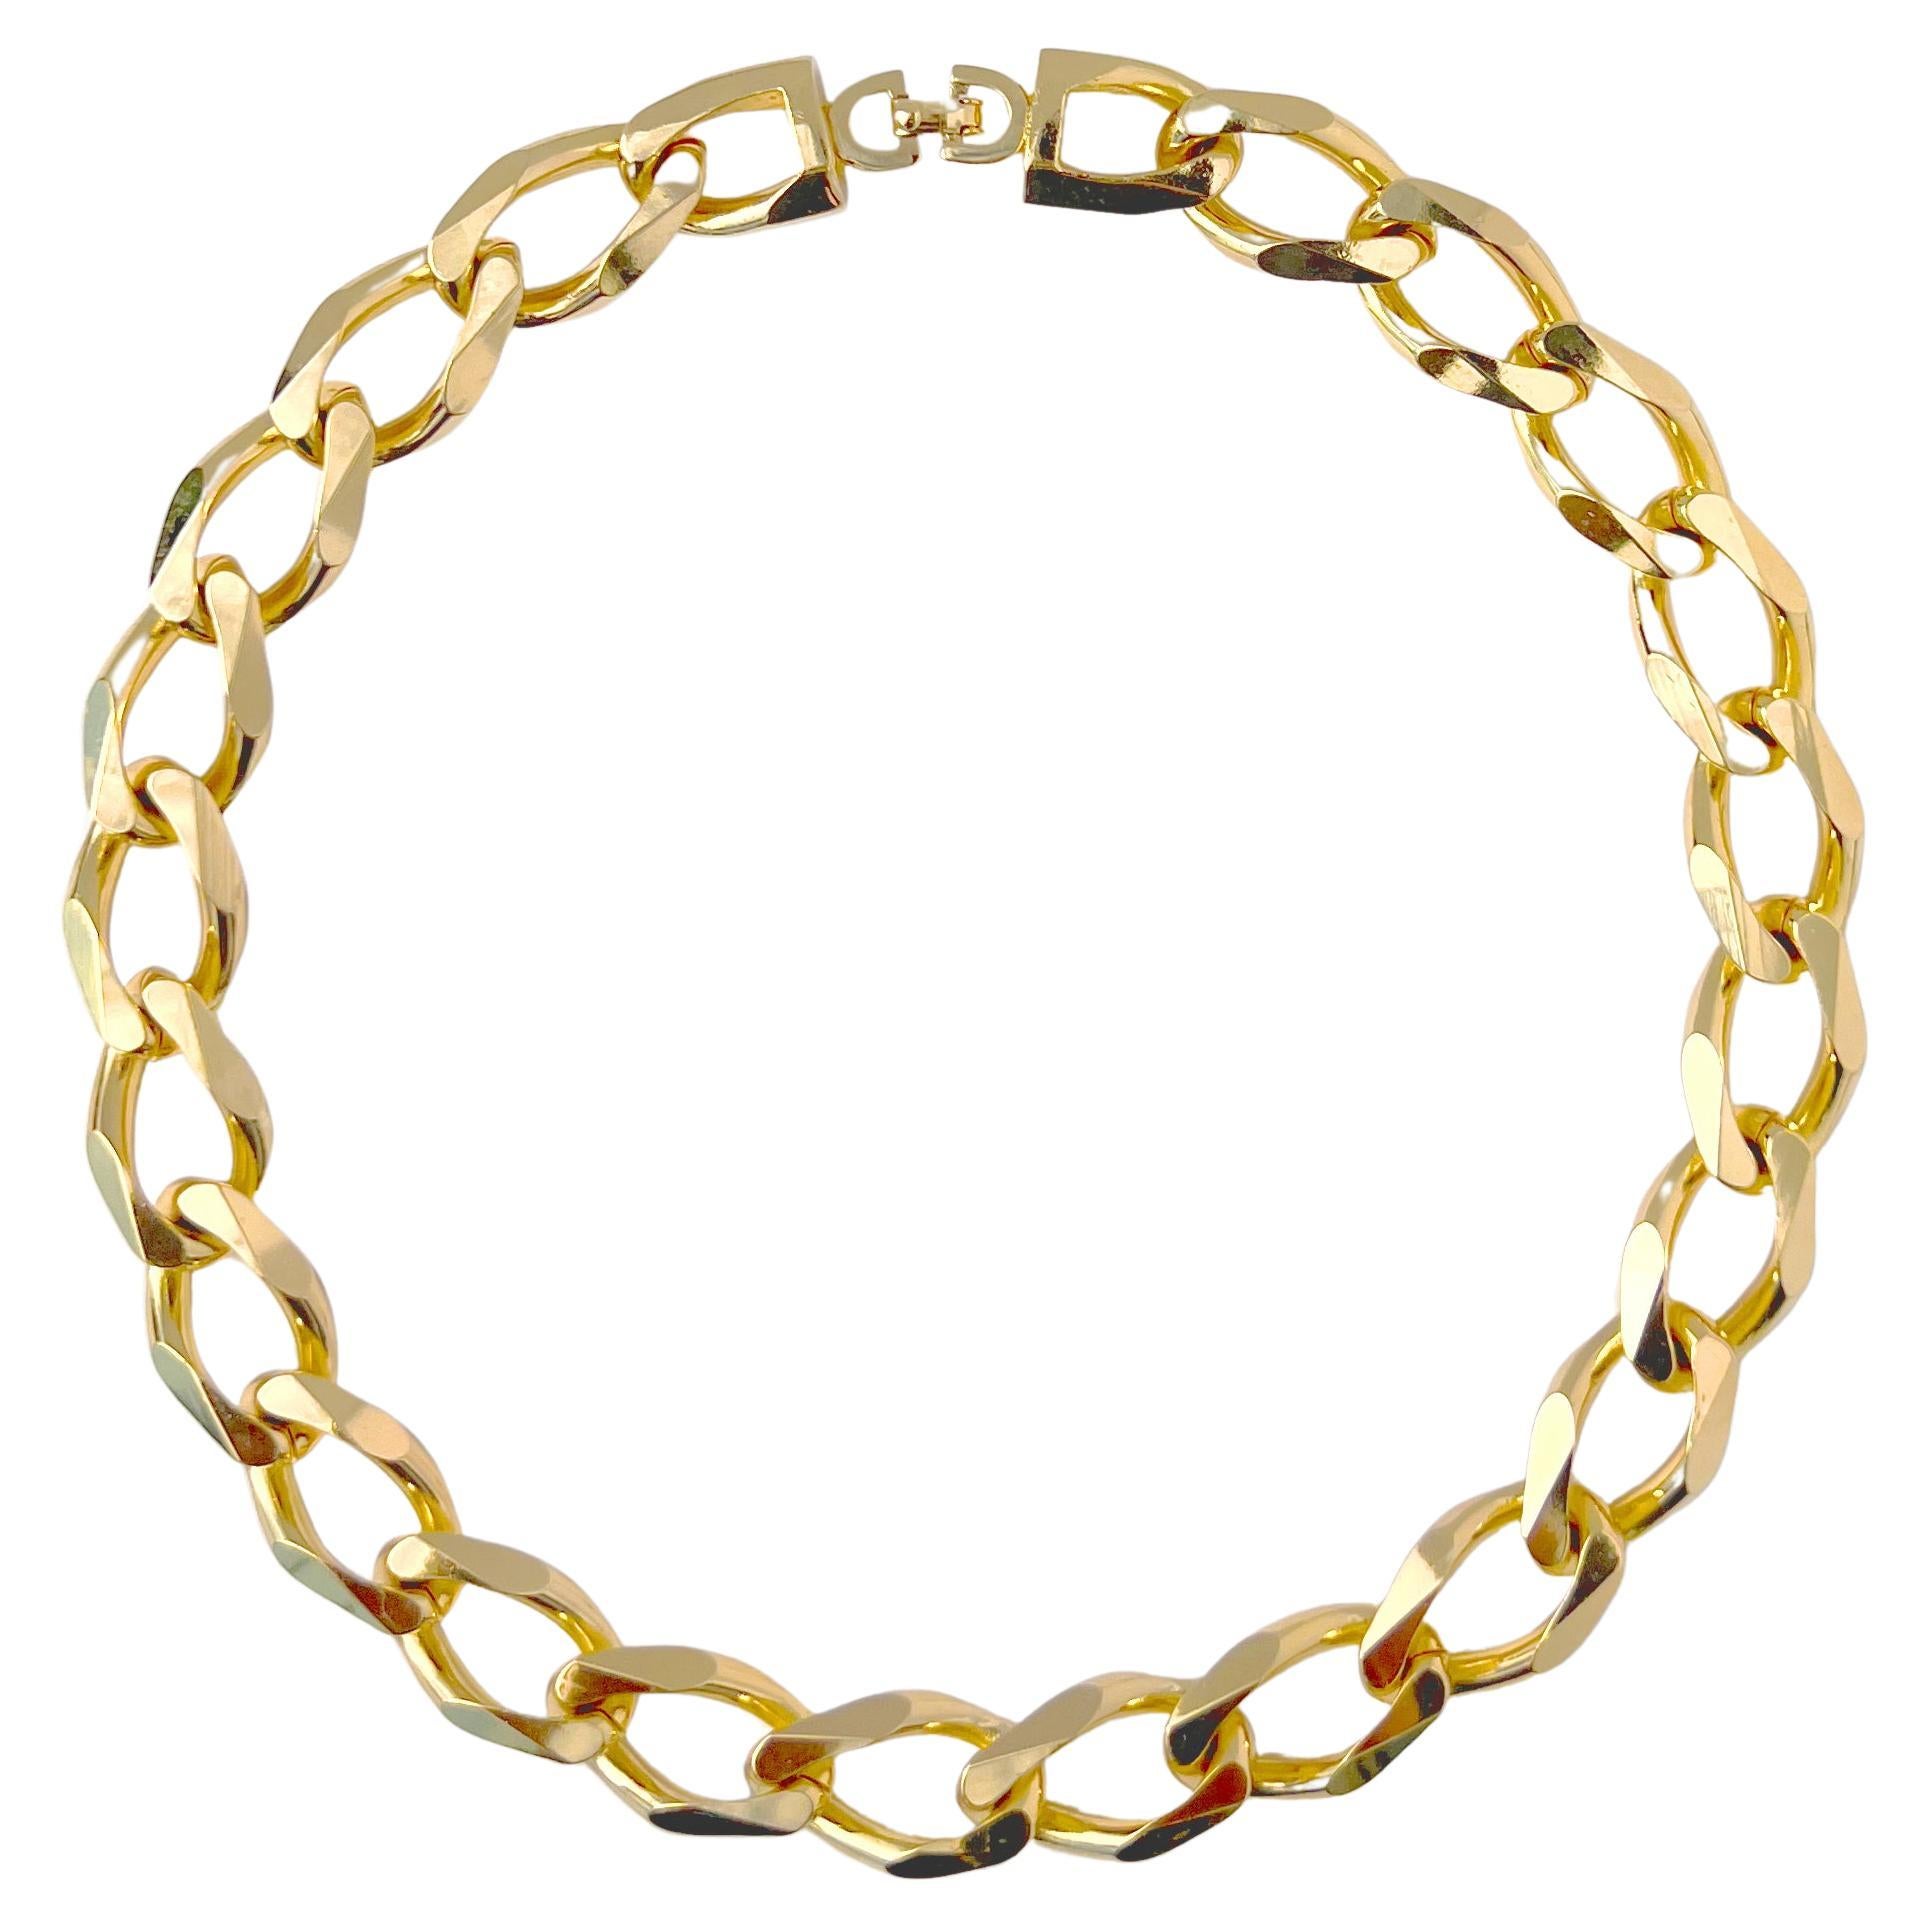 Vintage Christian Dior Curb Chain Necklace, 1990s